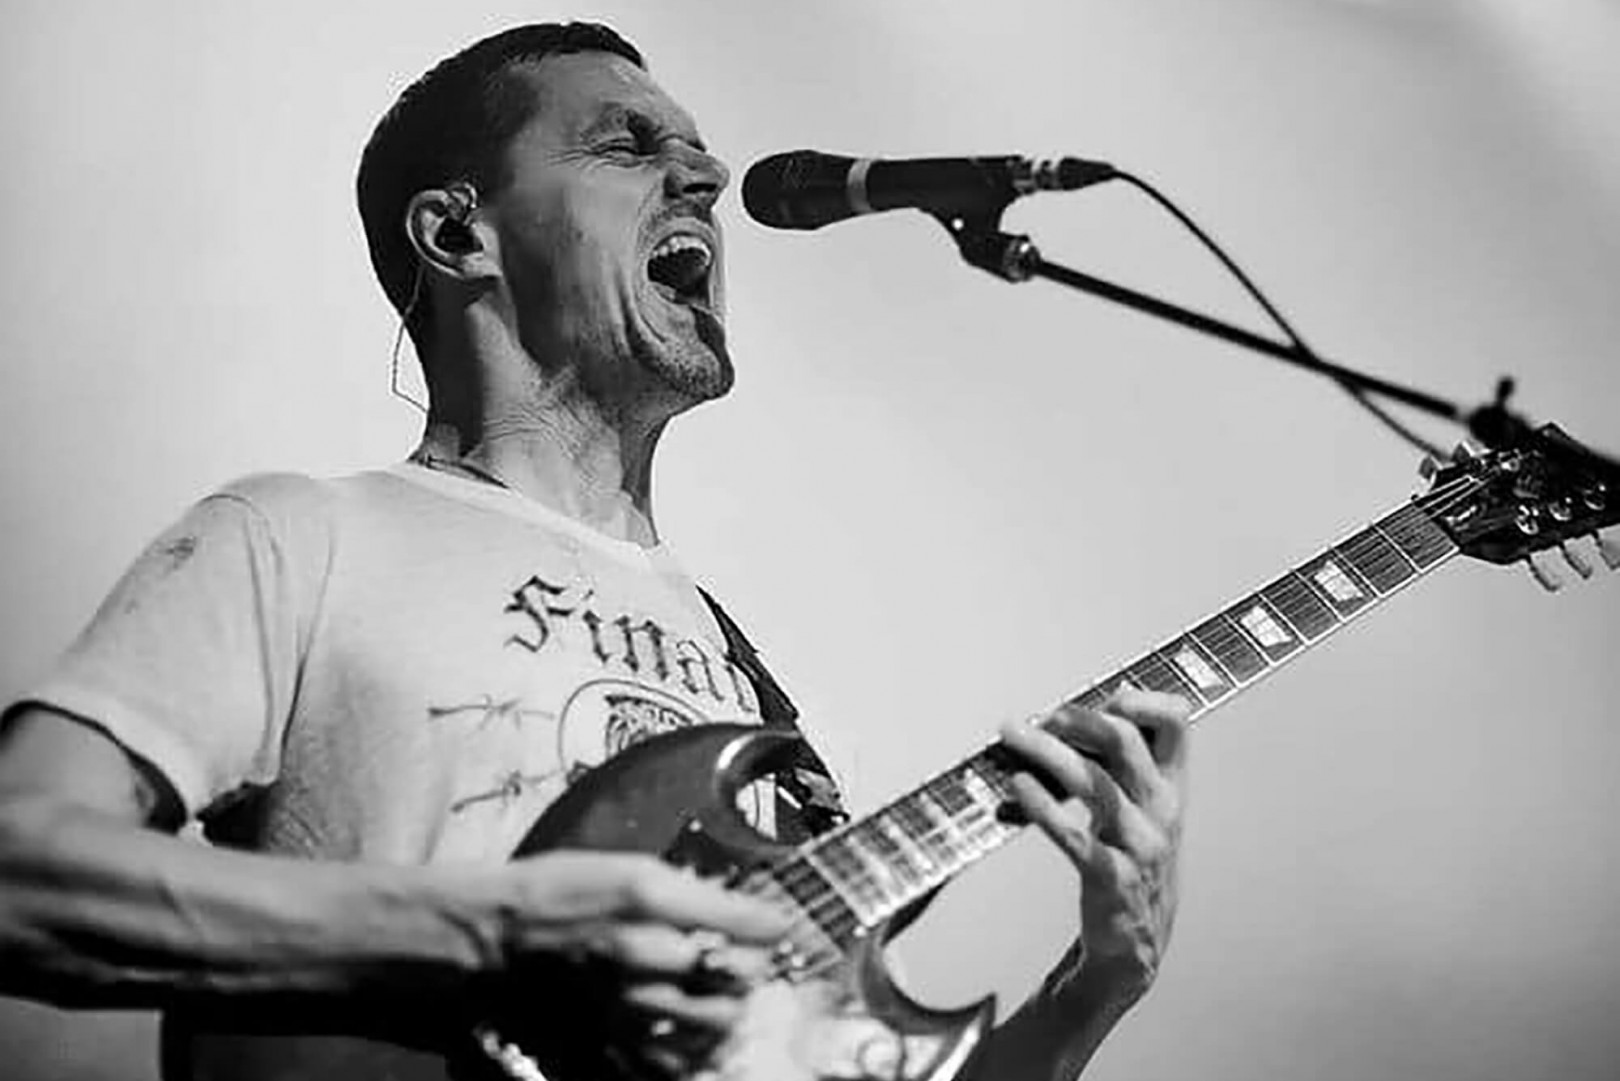 Jesus H. Chris (Propagandhi) quietly releases Patreon-exclusive tracks on streaming